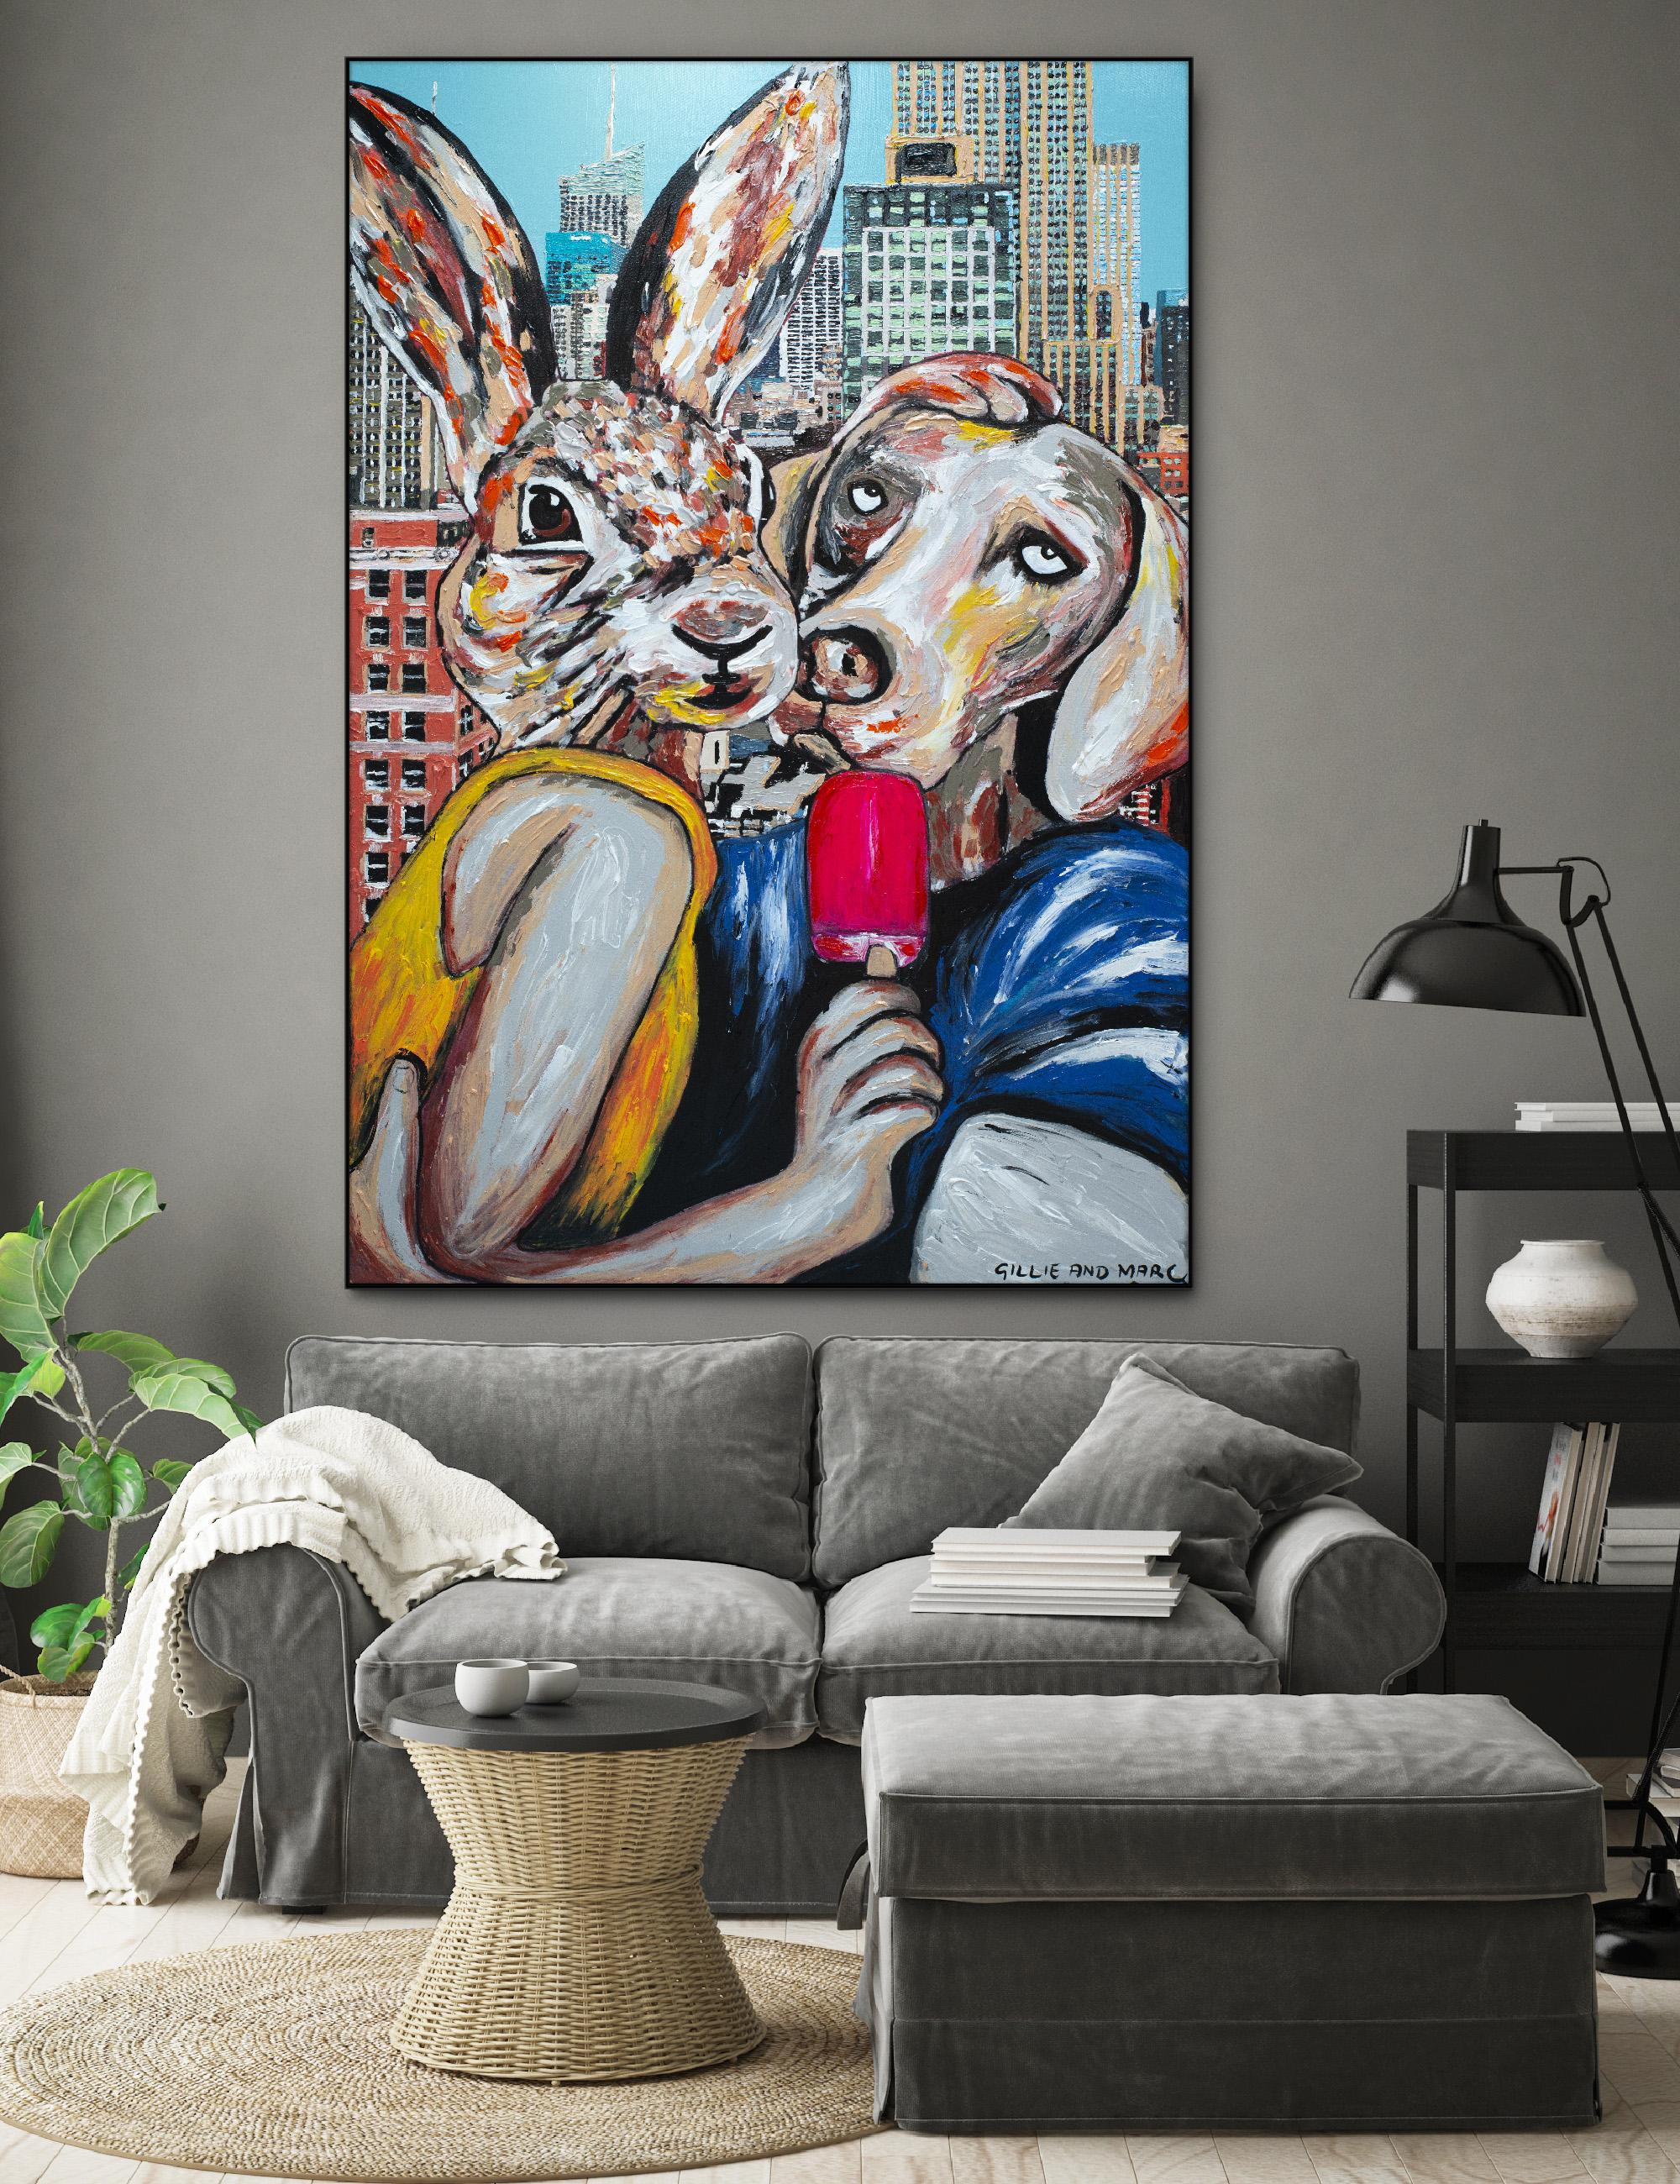 Title: They loved city living
Original Painting
Impasto and enamel on canvas
200 x 135 cm

World Famous Contemporary Artists: Husband and wife team, Gillie and Marc, are New York and Sydney-based contemporary artists who collaborate to create